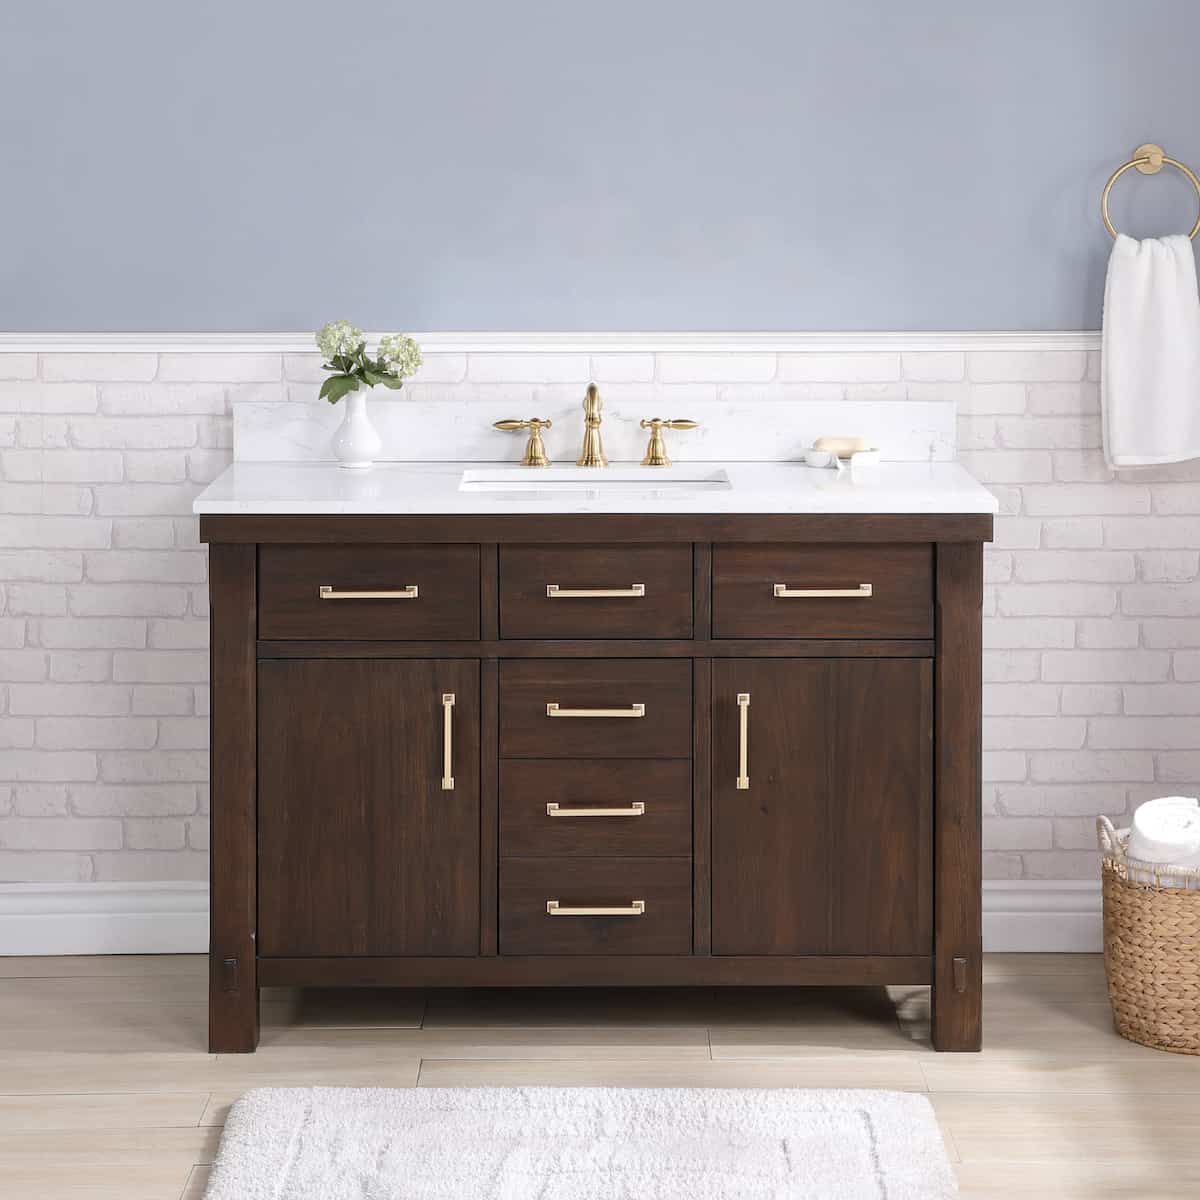 Vinnova Viella 48 Inch Freestanding Single Sink Bath Vanity in Deep Walnut Finish with White Composite Countertop Without Mirror in Bathroom 701848-DW-WS-NM